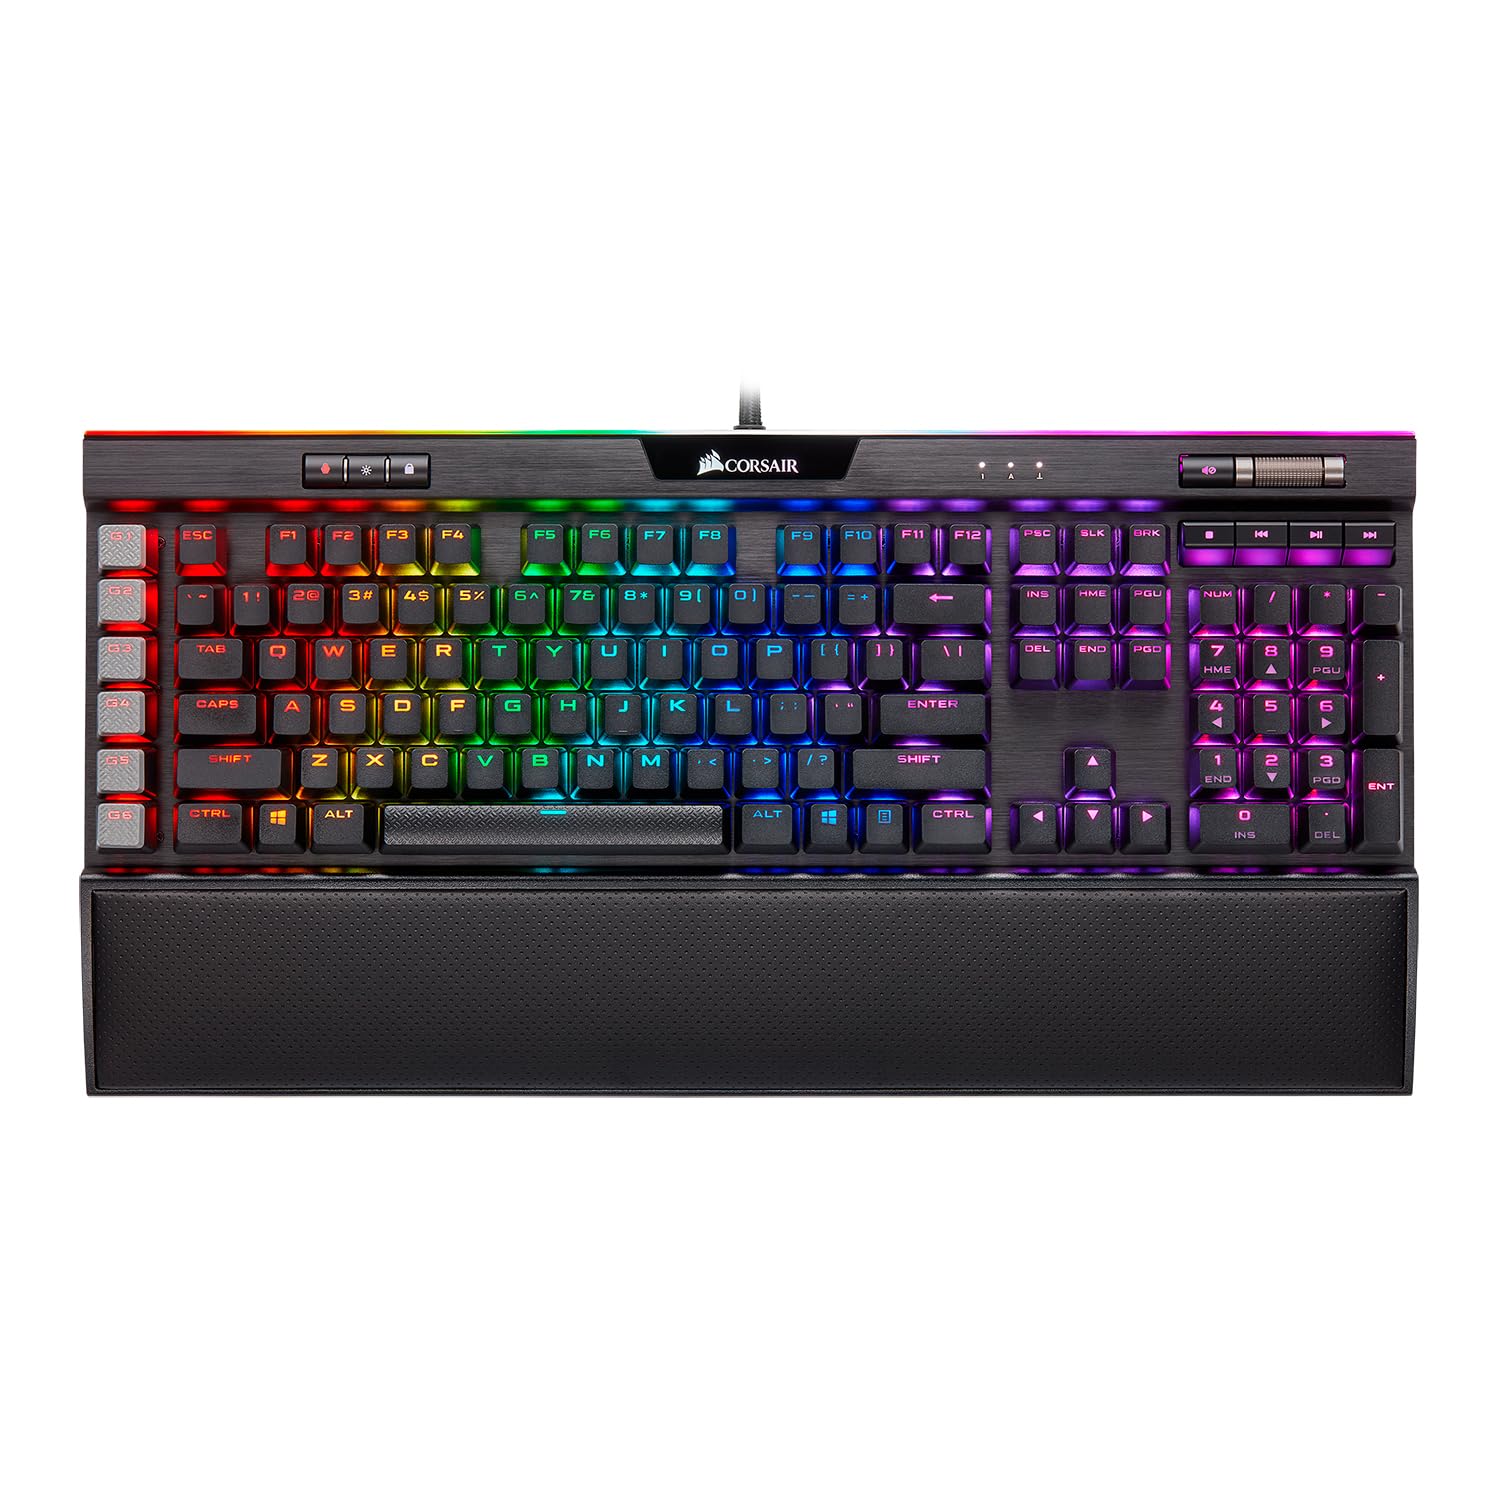 Corsair K95 RGB Platinum XT Cherry MX Backlit Mechanical Gaming Keyboard w/ Leatherette Palm Rest & Corsair iCue (Speed Silver) $135.90 + Free Shipping